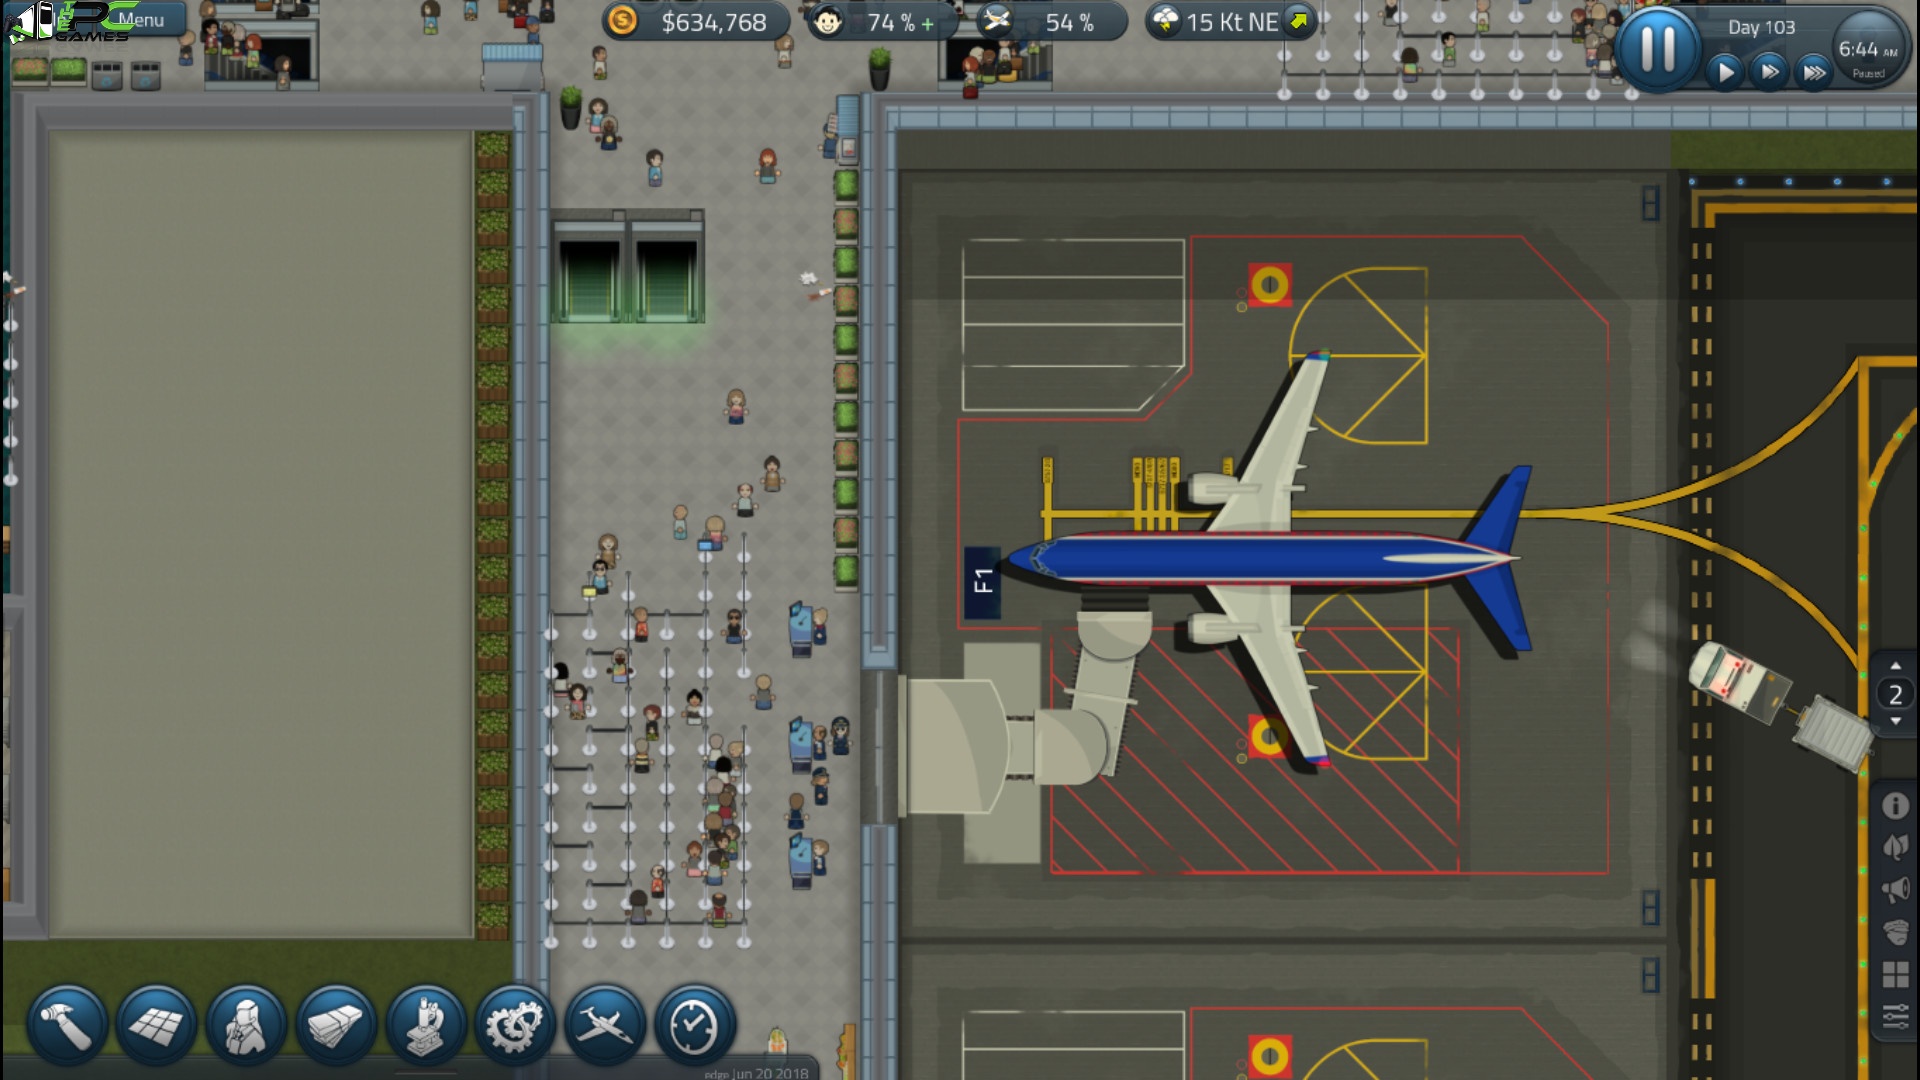 SimAirport PC Latest Version Game Free Download